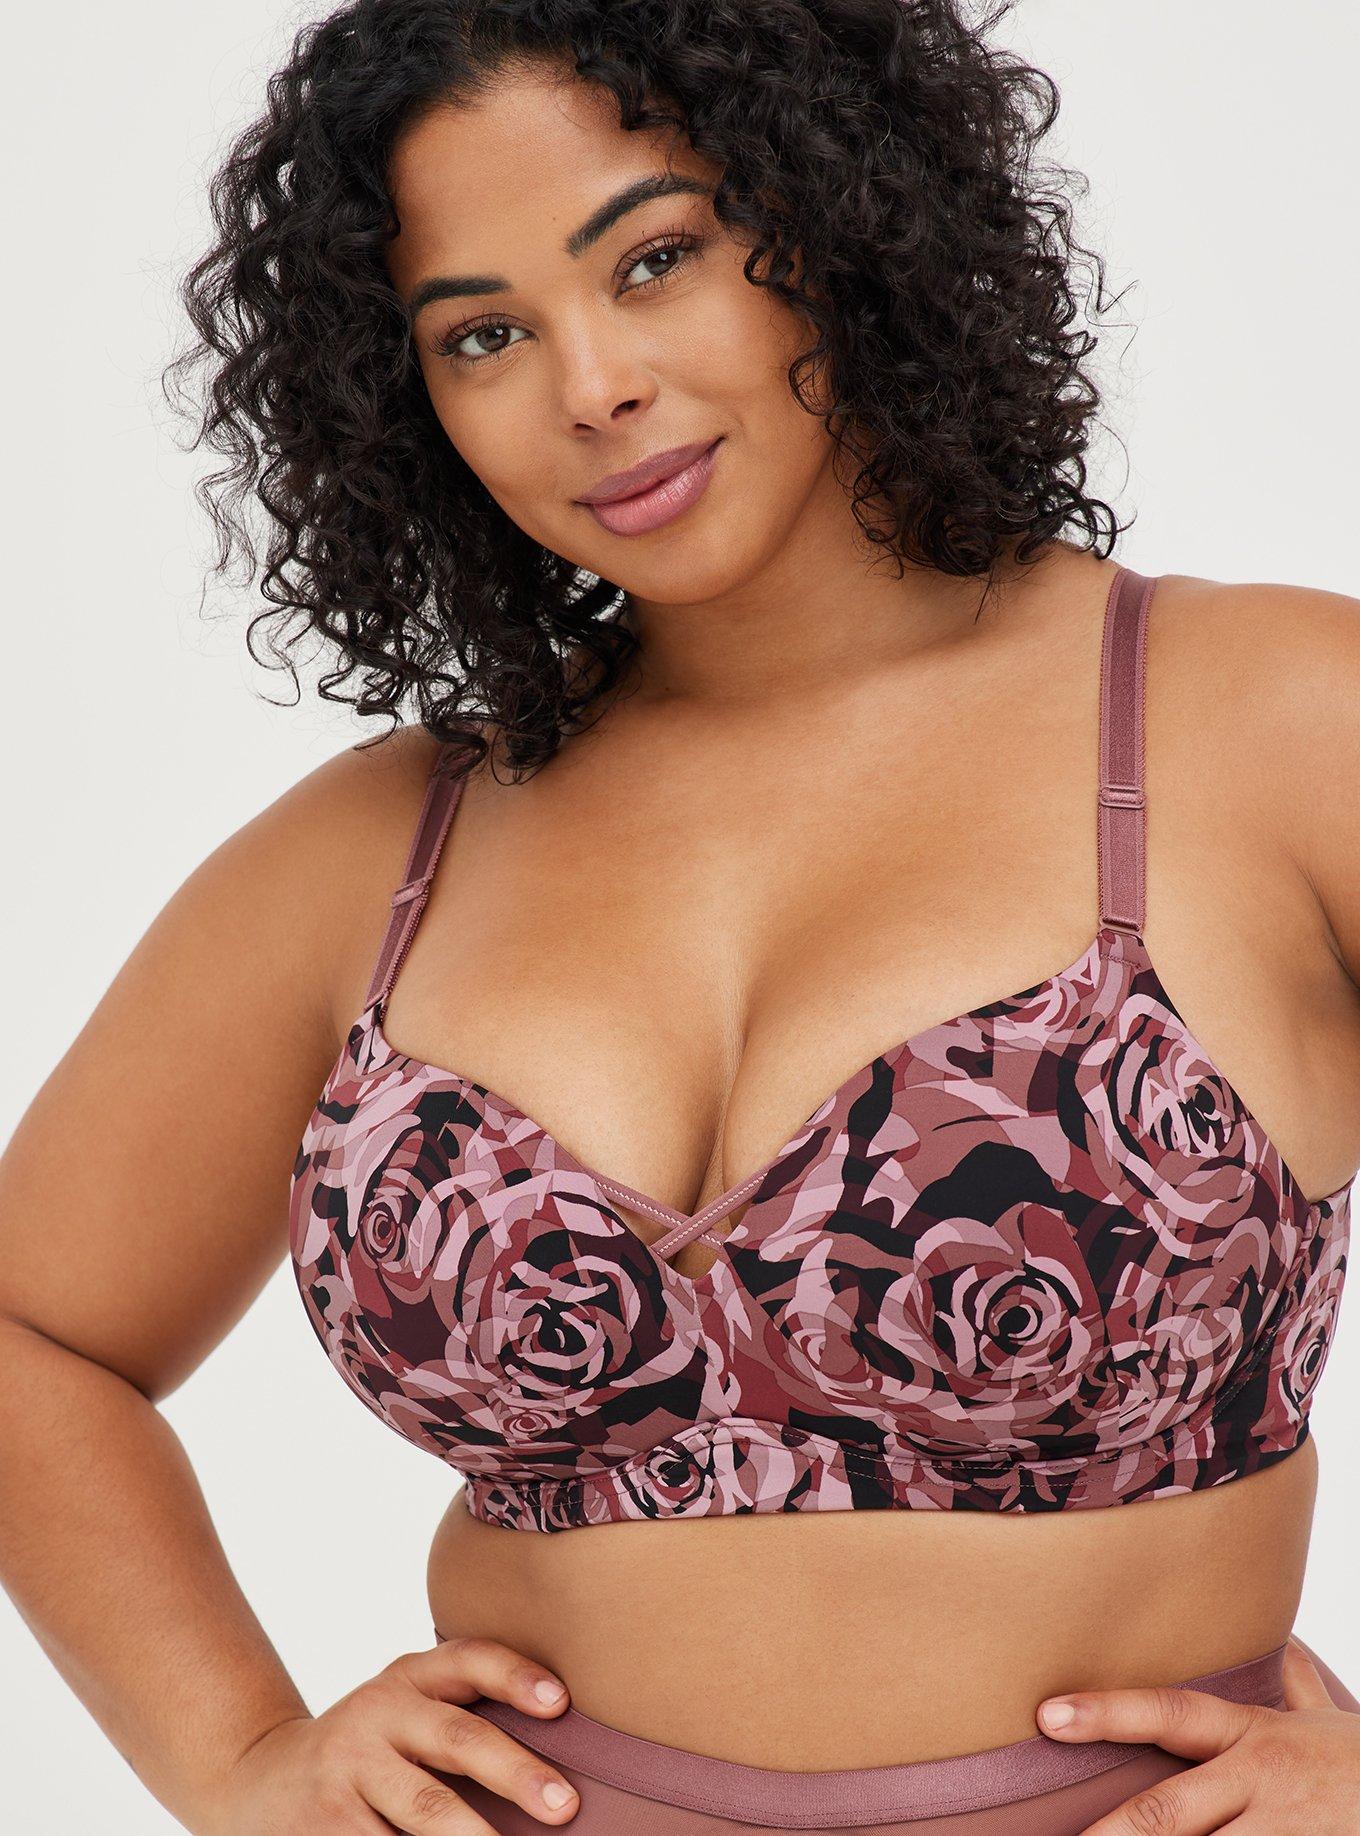 Size 46C Plus Size Large Cup Bras: Cups F To K